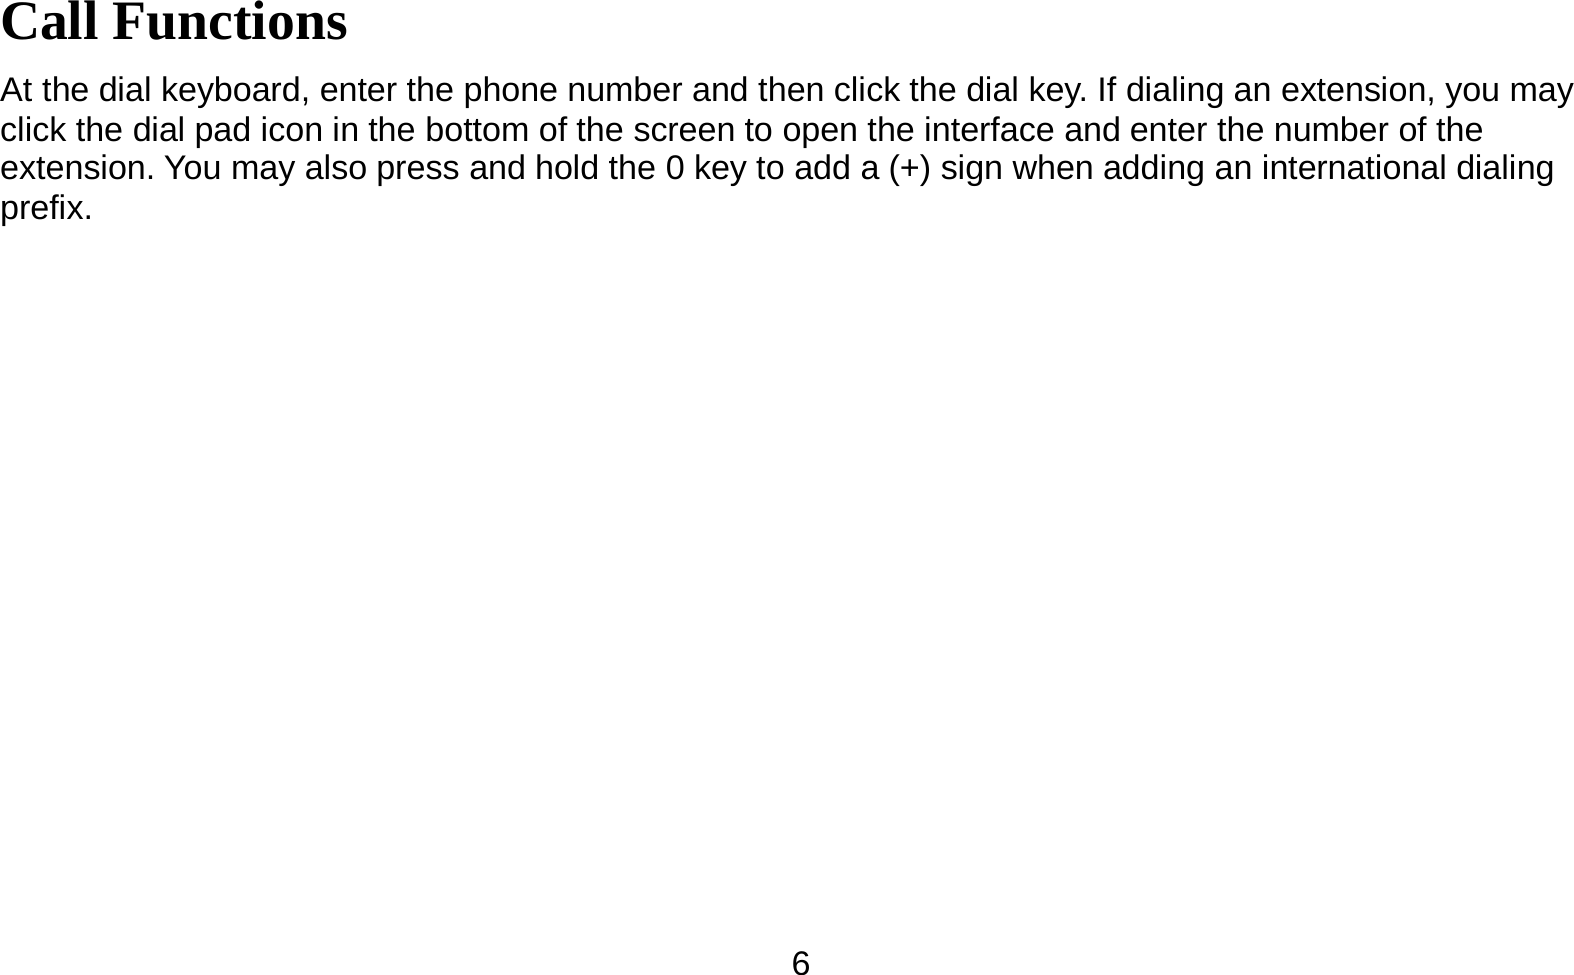   6Call Functions                                        At the dial keyboard, enter the phone number and then click the dial key. If dialing an extension, you may click the dial pad icon in the bottom of the screen to open the interface and enter the number of the extension. You may also press and hold the 0 key to add a (+) sign when adding an international dialing prefix.  